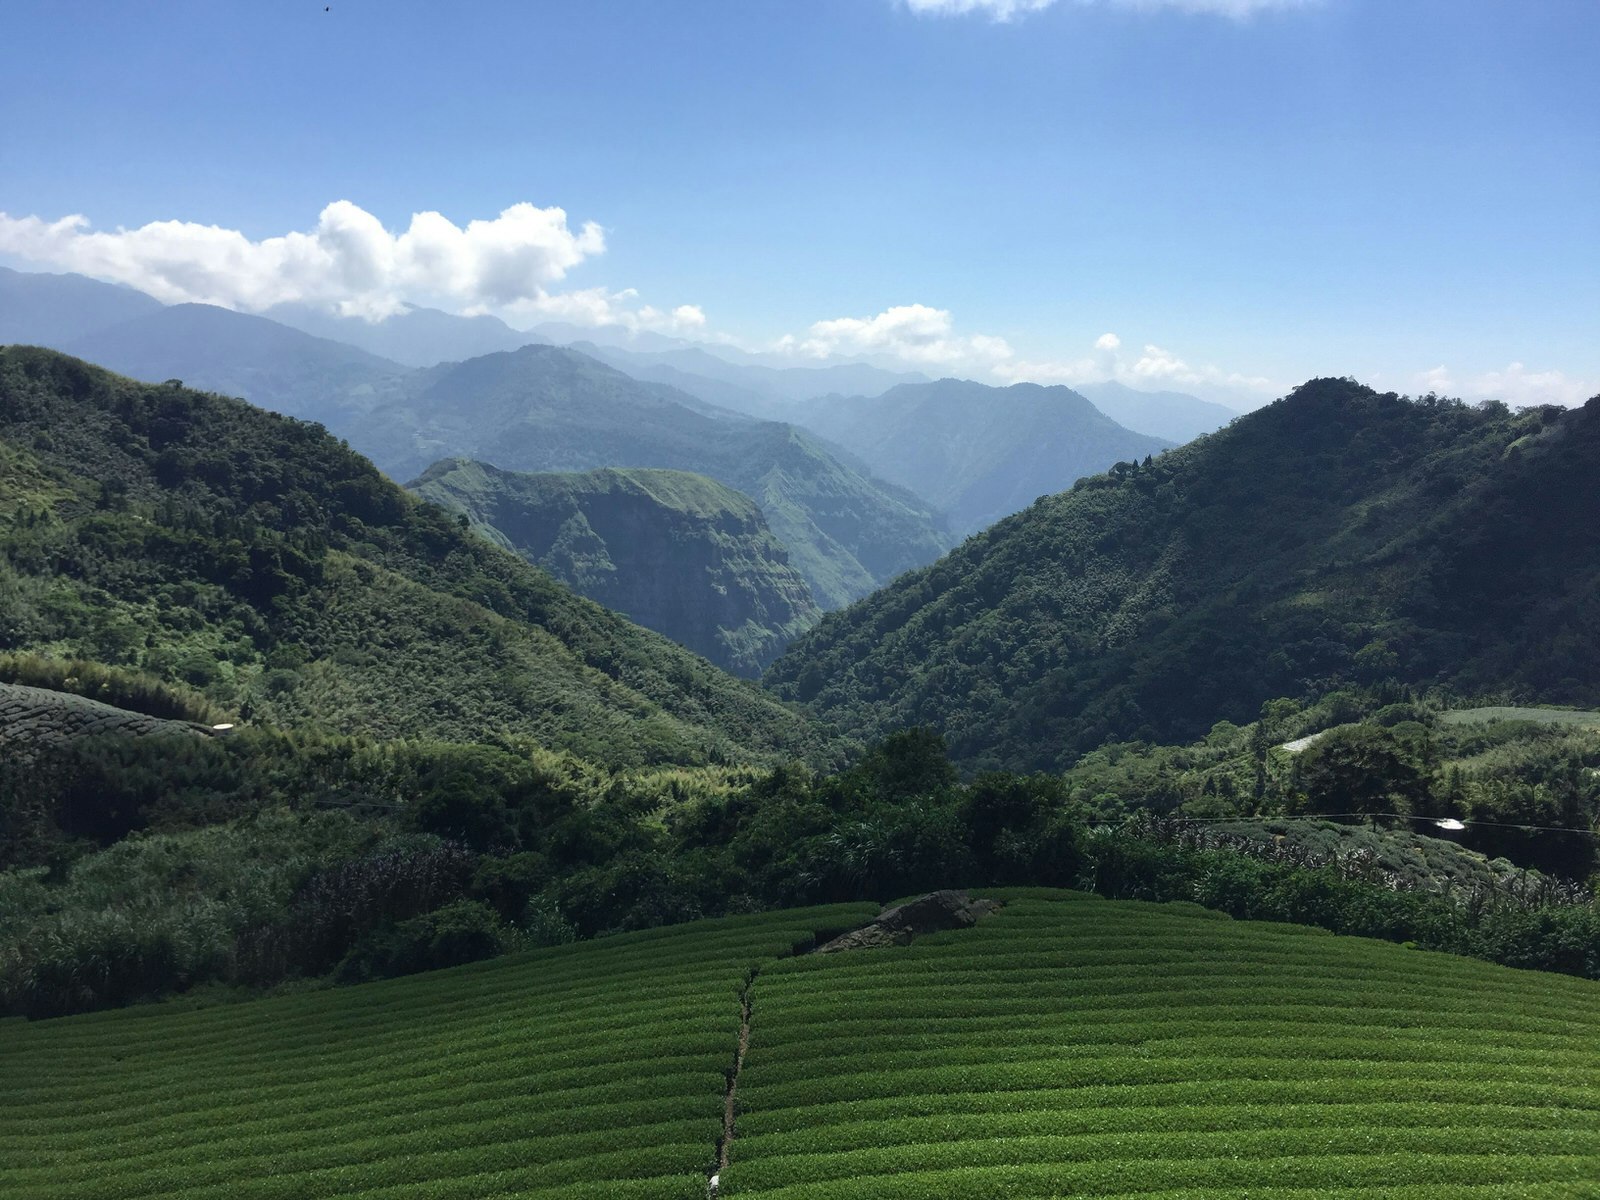 A row of green tea bush terraces spreads in front, with mountains and clouds beyond.